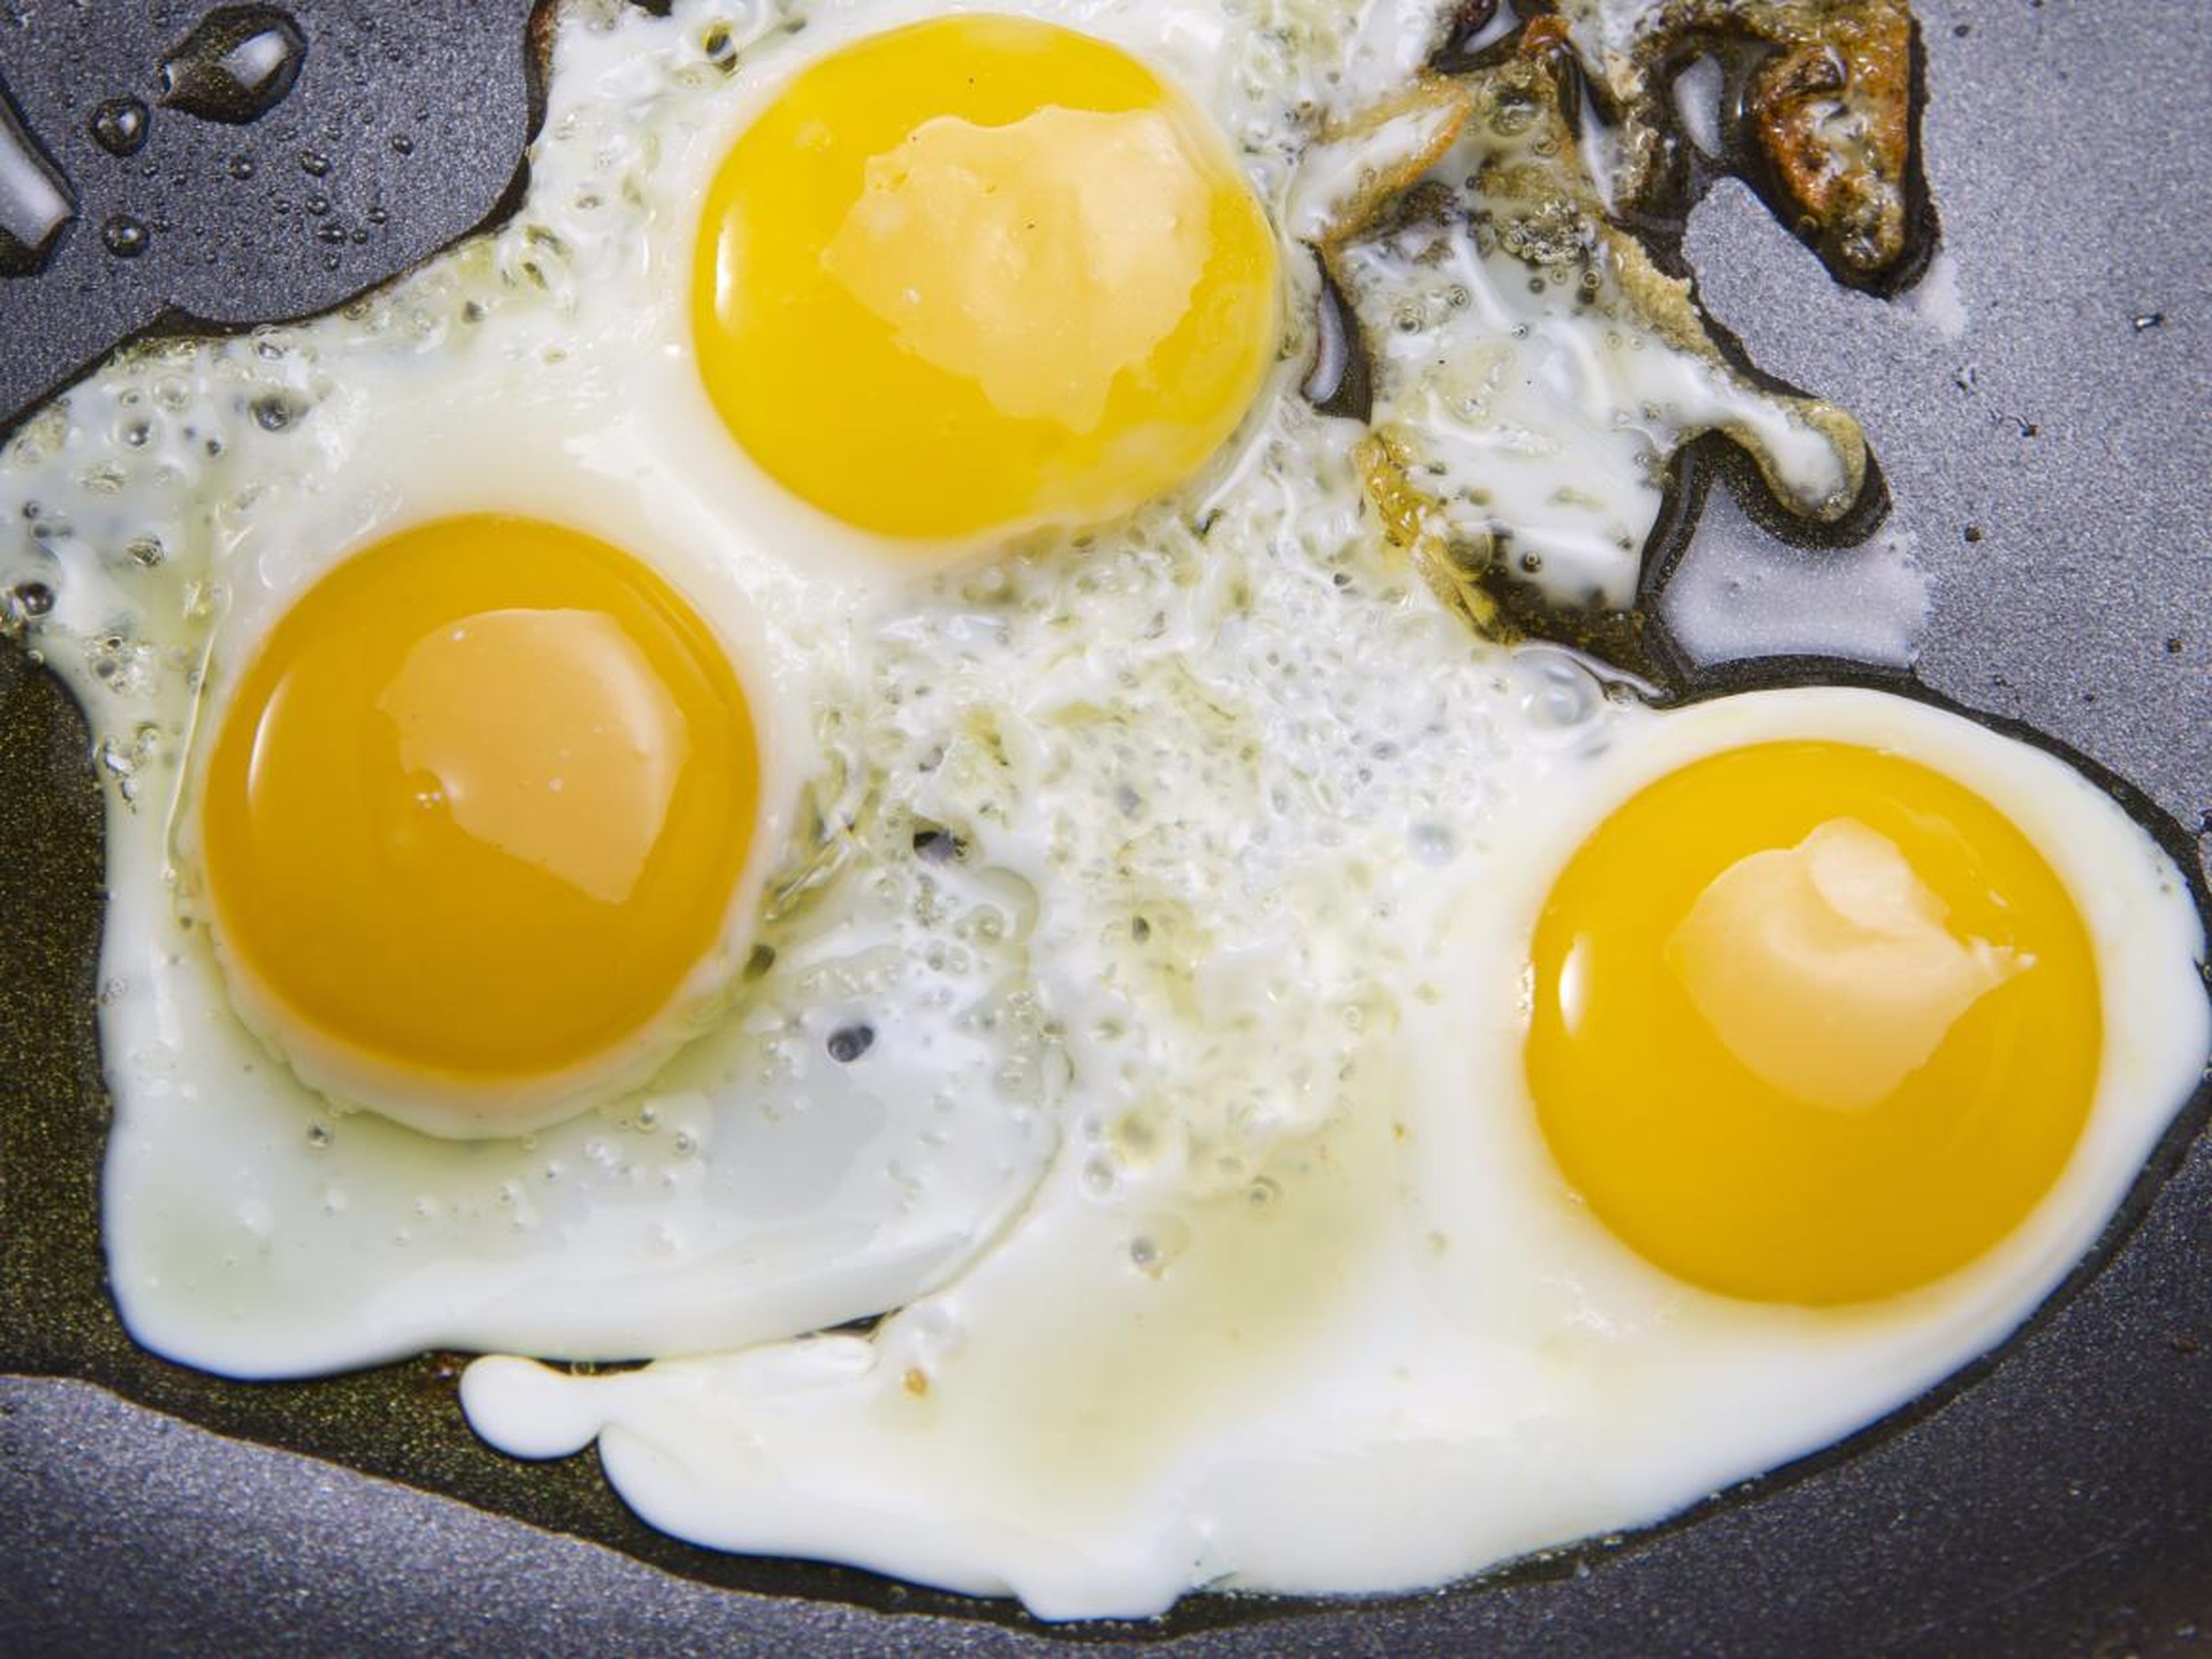 Eggs are low-calorie and high-protein.